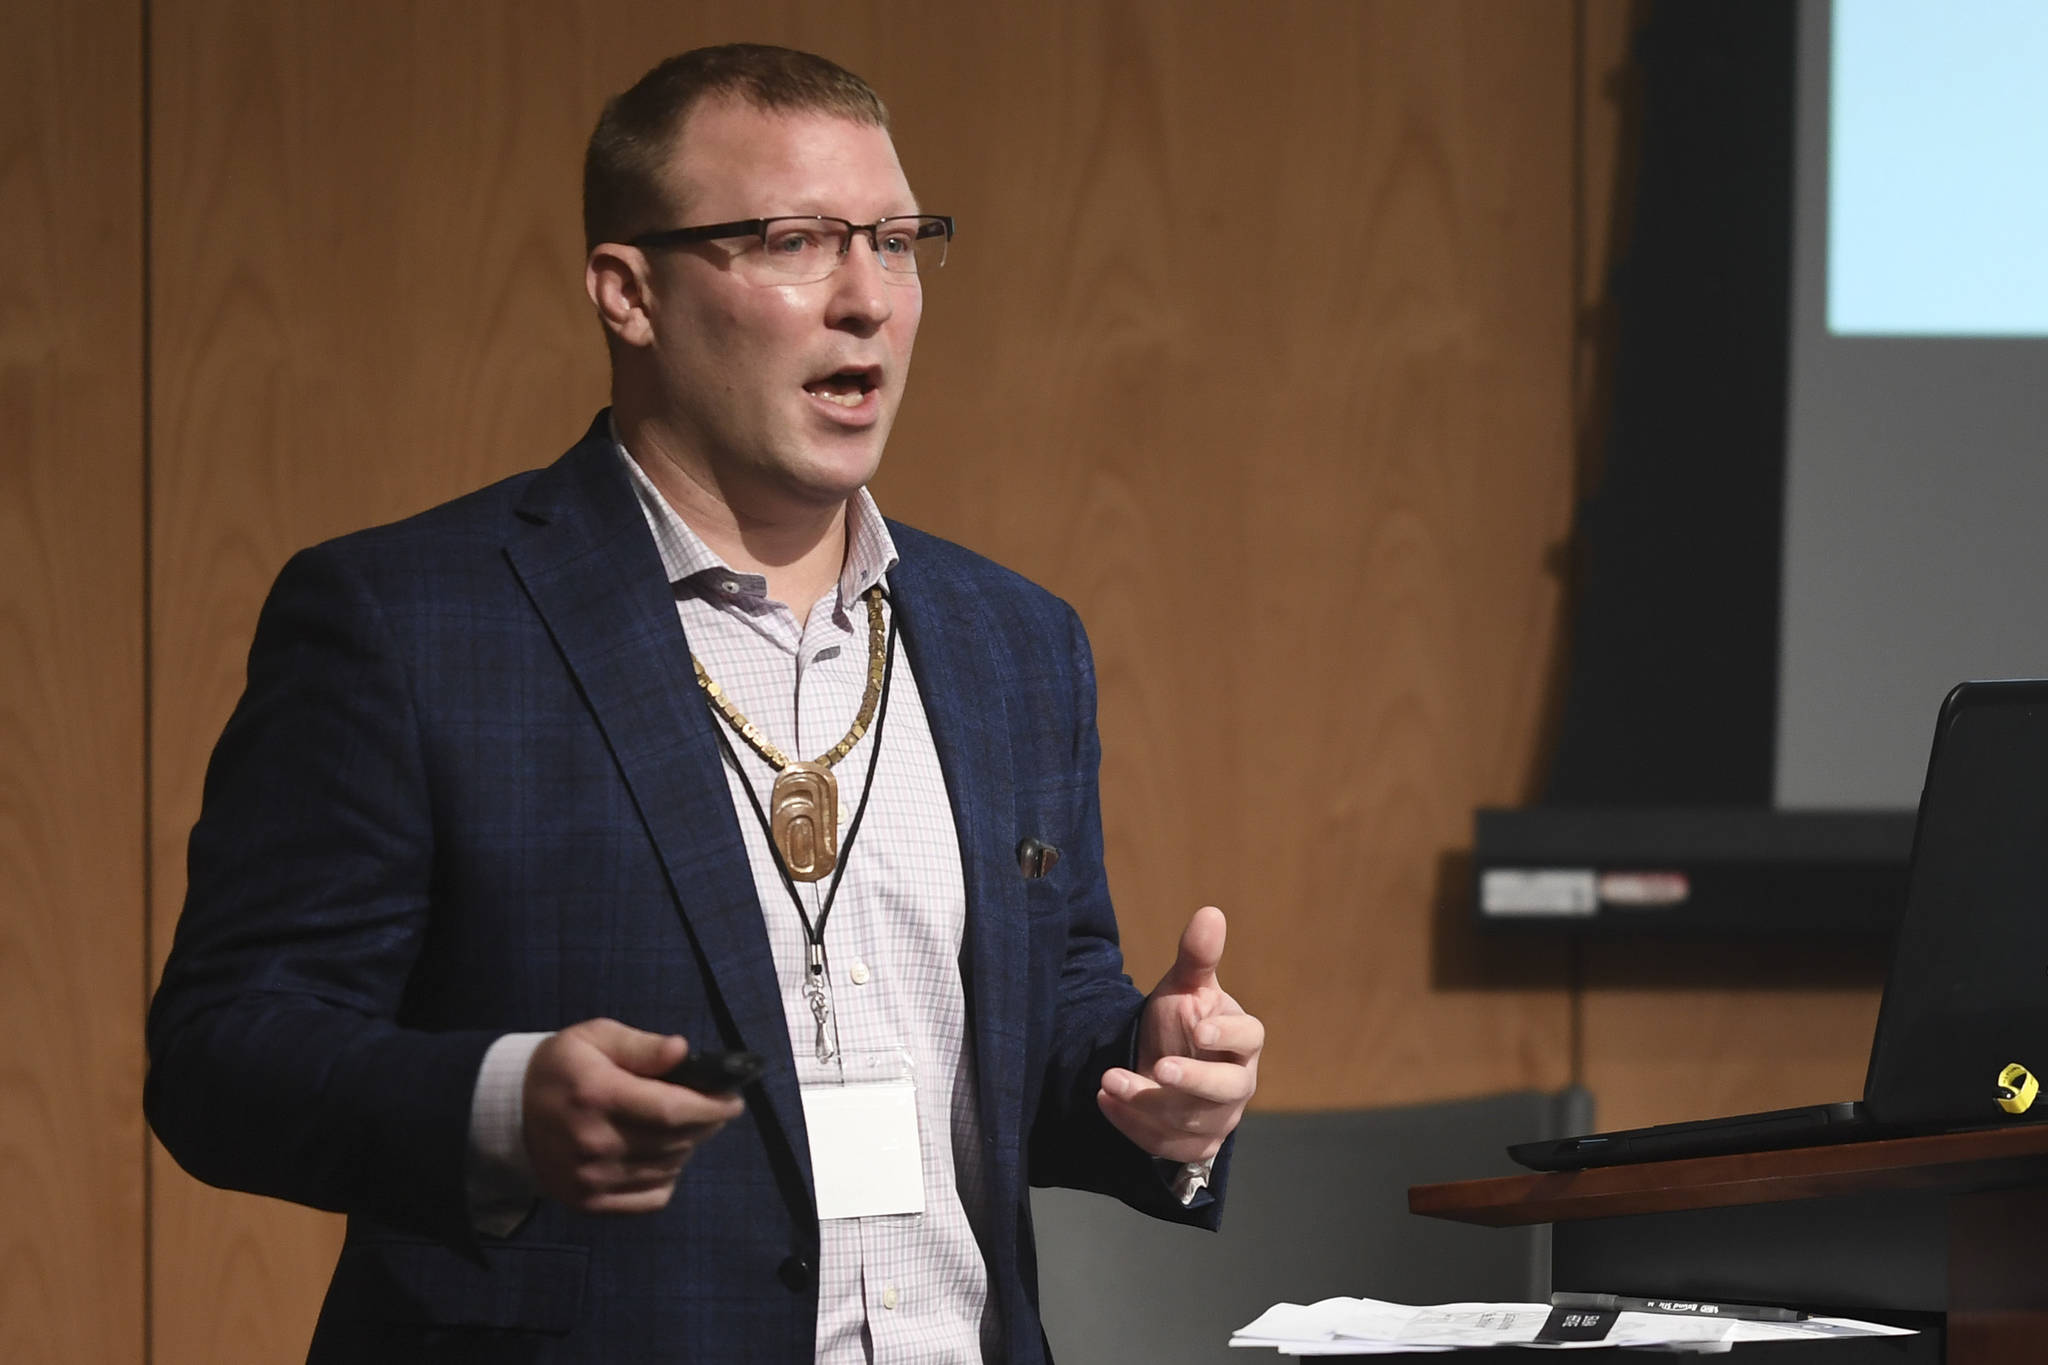 Lee Kadinger, Chief of Operations for Sealaska Heritage Institute, speaks about sustainable use of sea otter pelts at the Southeast Sea Otter Stakeholder meeting at the Andrew P. Kashevaroff Building on Wednesday, Nov. 6, 2019. (Michael Penn | Juneau Empire)